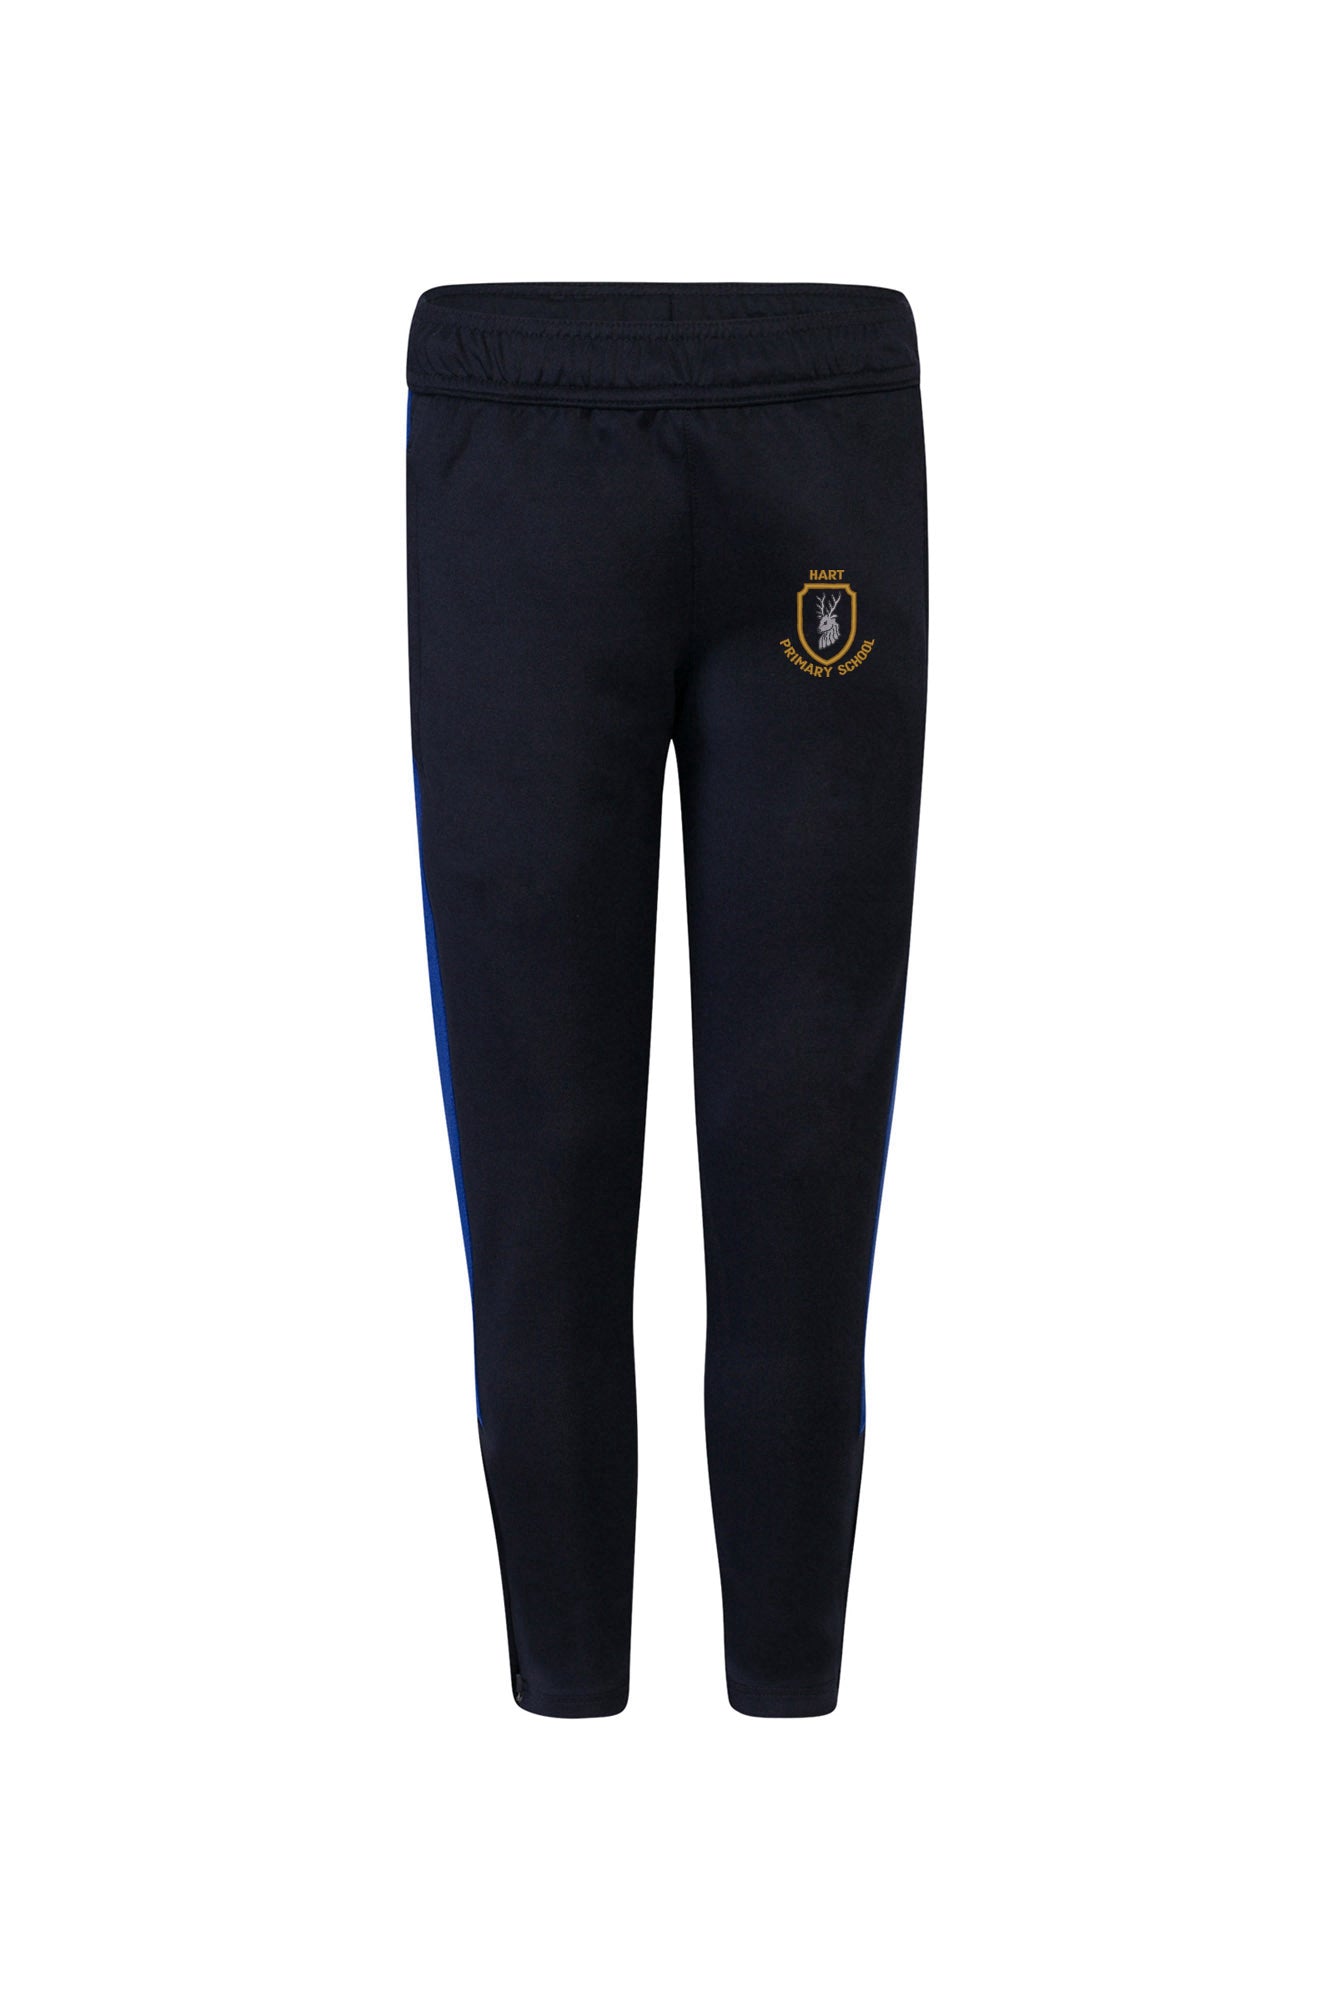 Hart Primary Navy And Royal Blue Tracksuit Bottoms